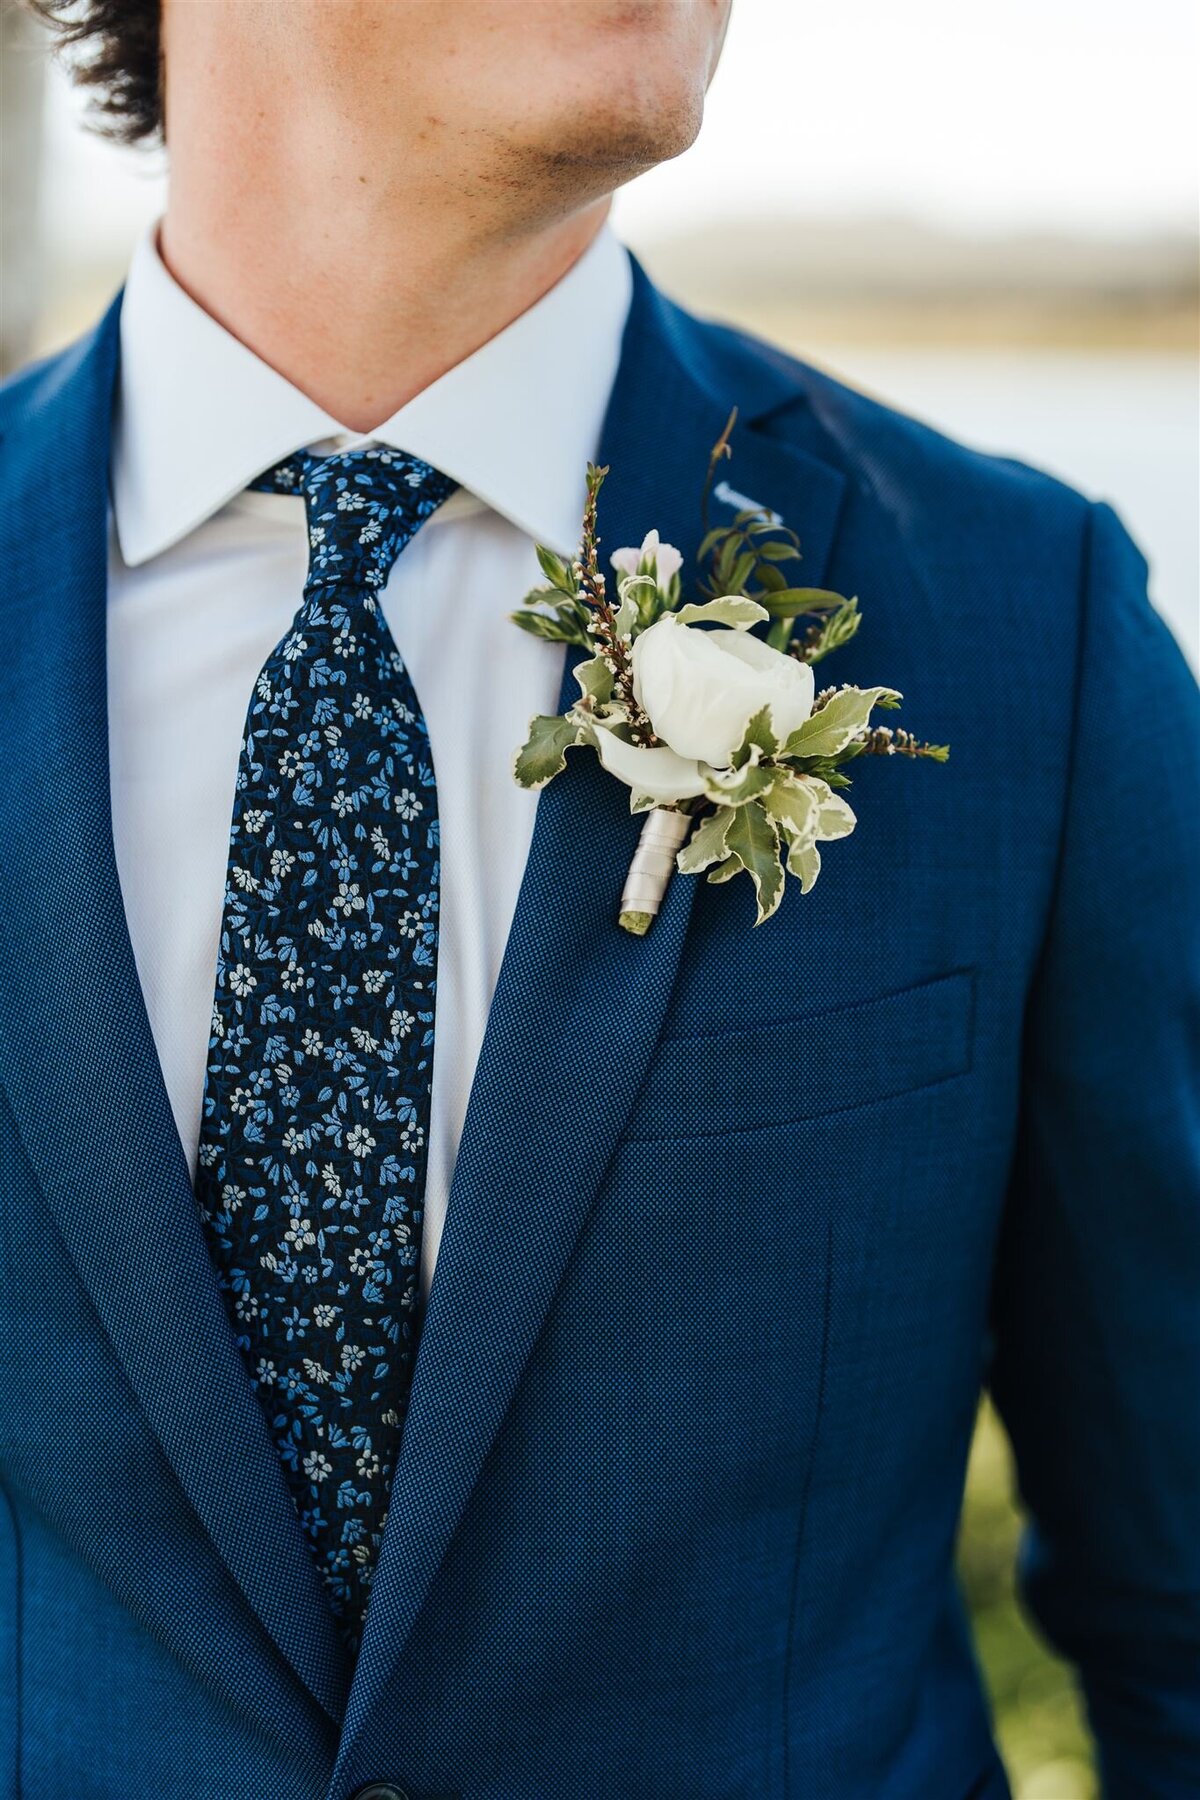 White ranunculus boutonniere with mixed greenery  with blue floral tie